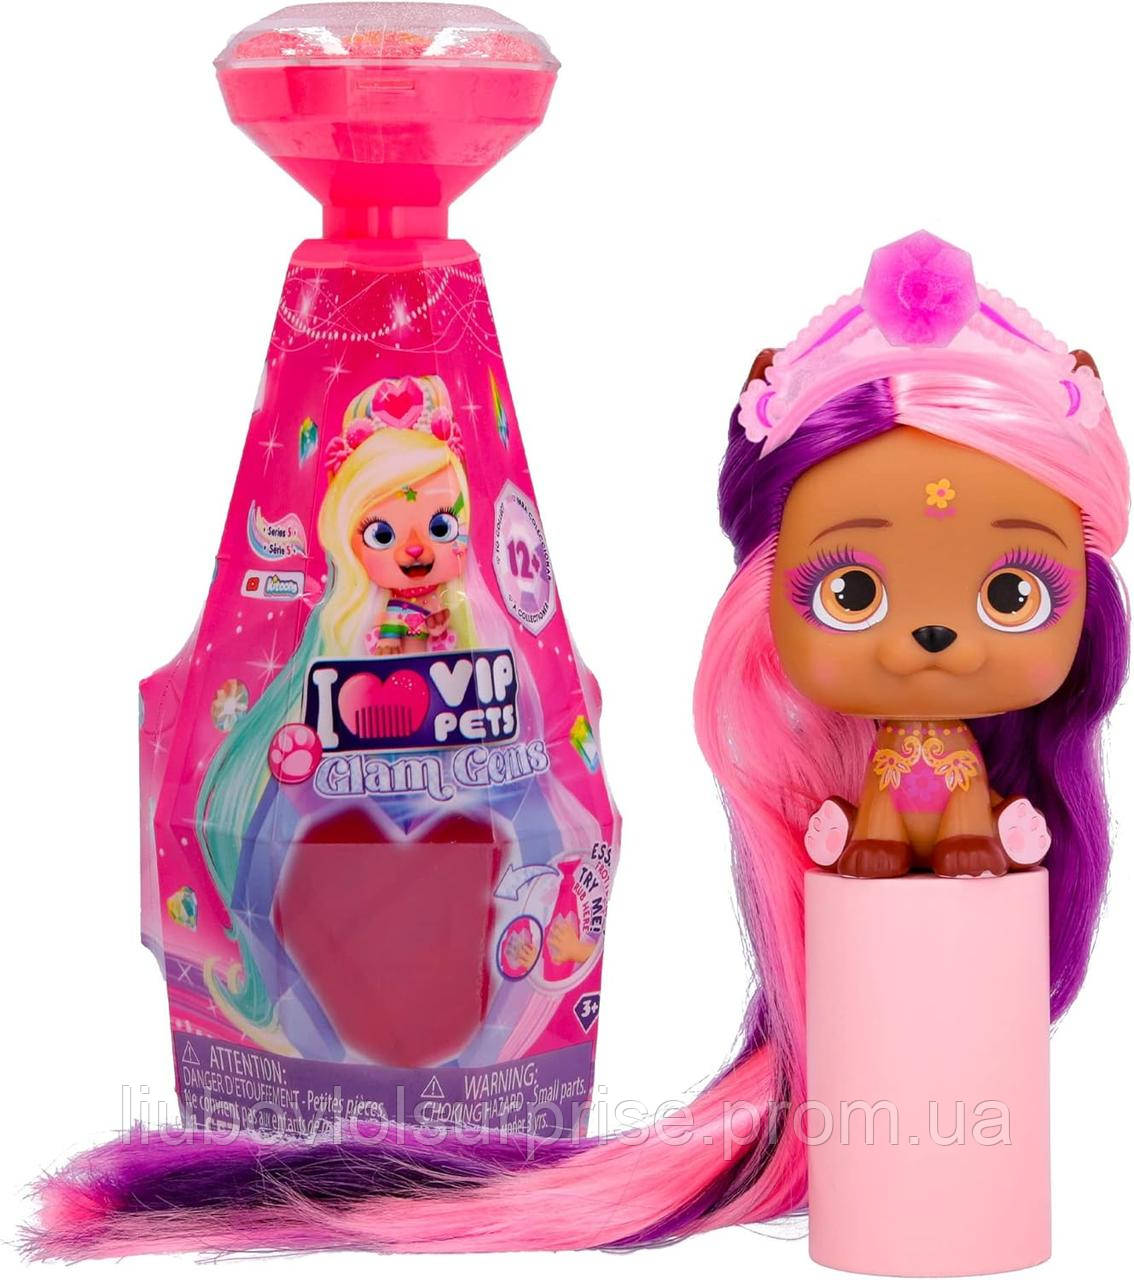 IMC Toys VIP Pets - Glam Gems Series 5- Includes 1 VIP Pets Doll, 9 Surprises, 6 Accessories for Hair Styling